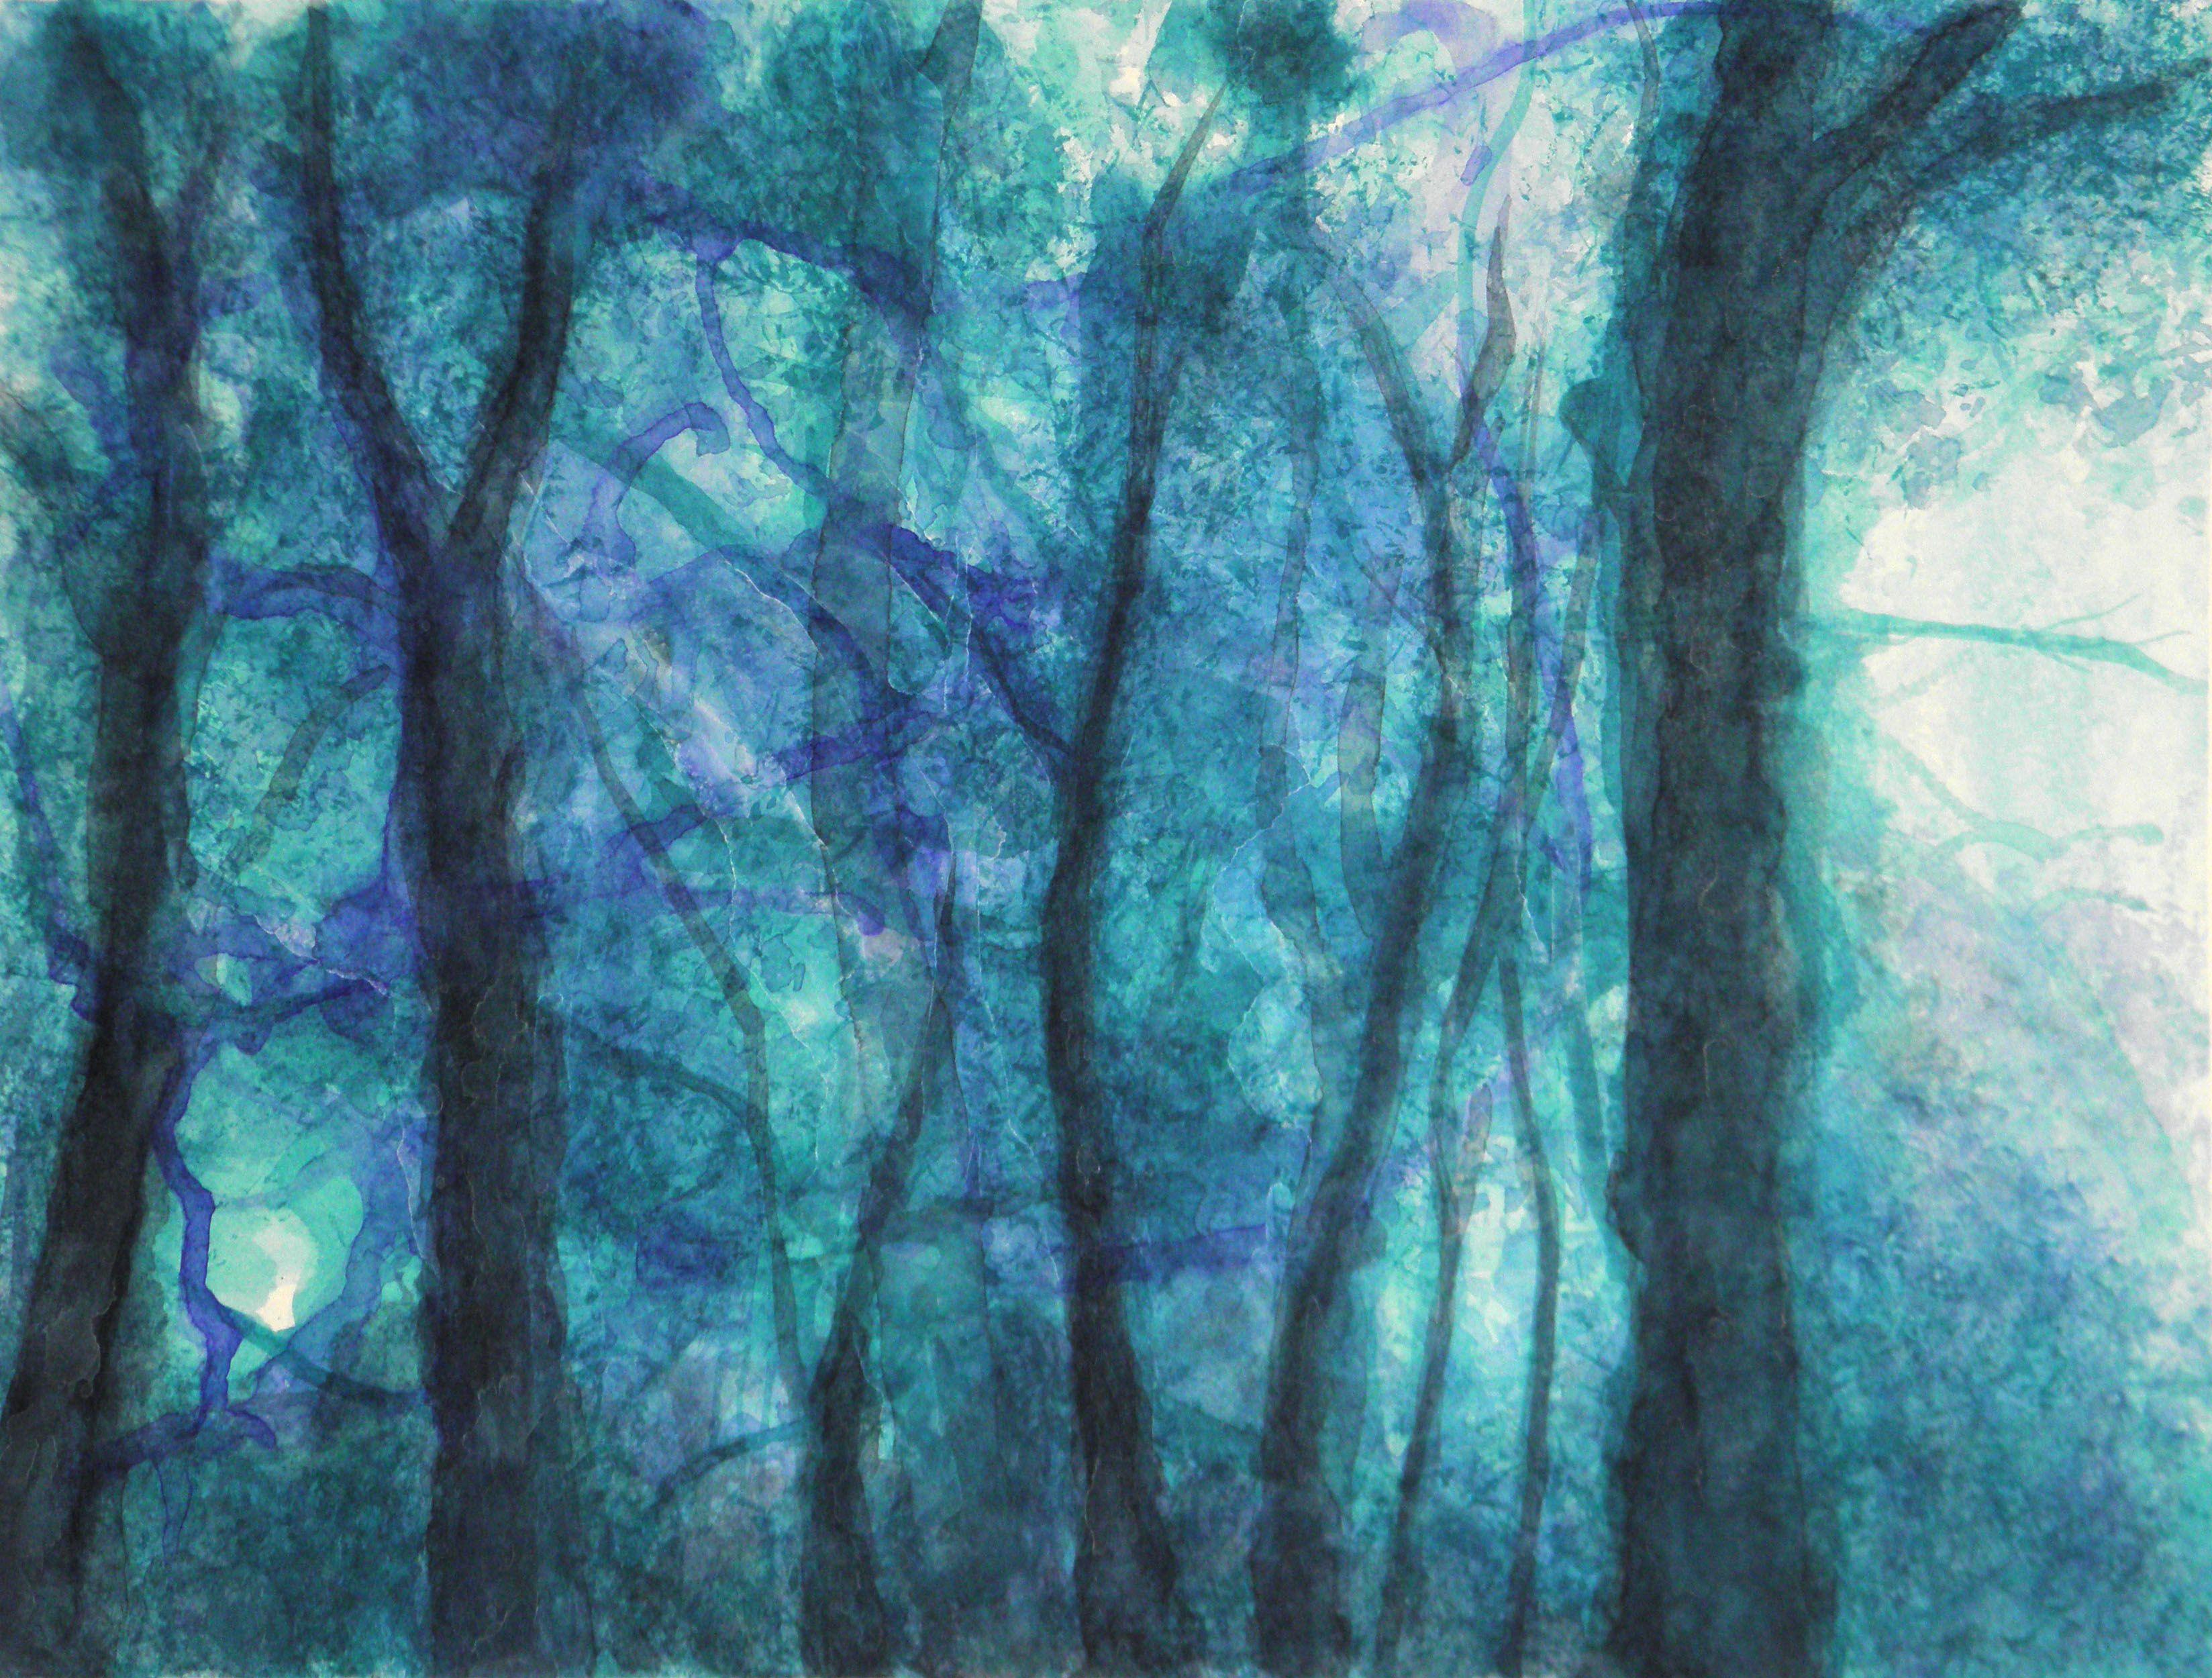 In the woodland : The witches trees #2, Painting, Watercolor on Paper - Contemporary Art by Fabienne Monestier